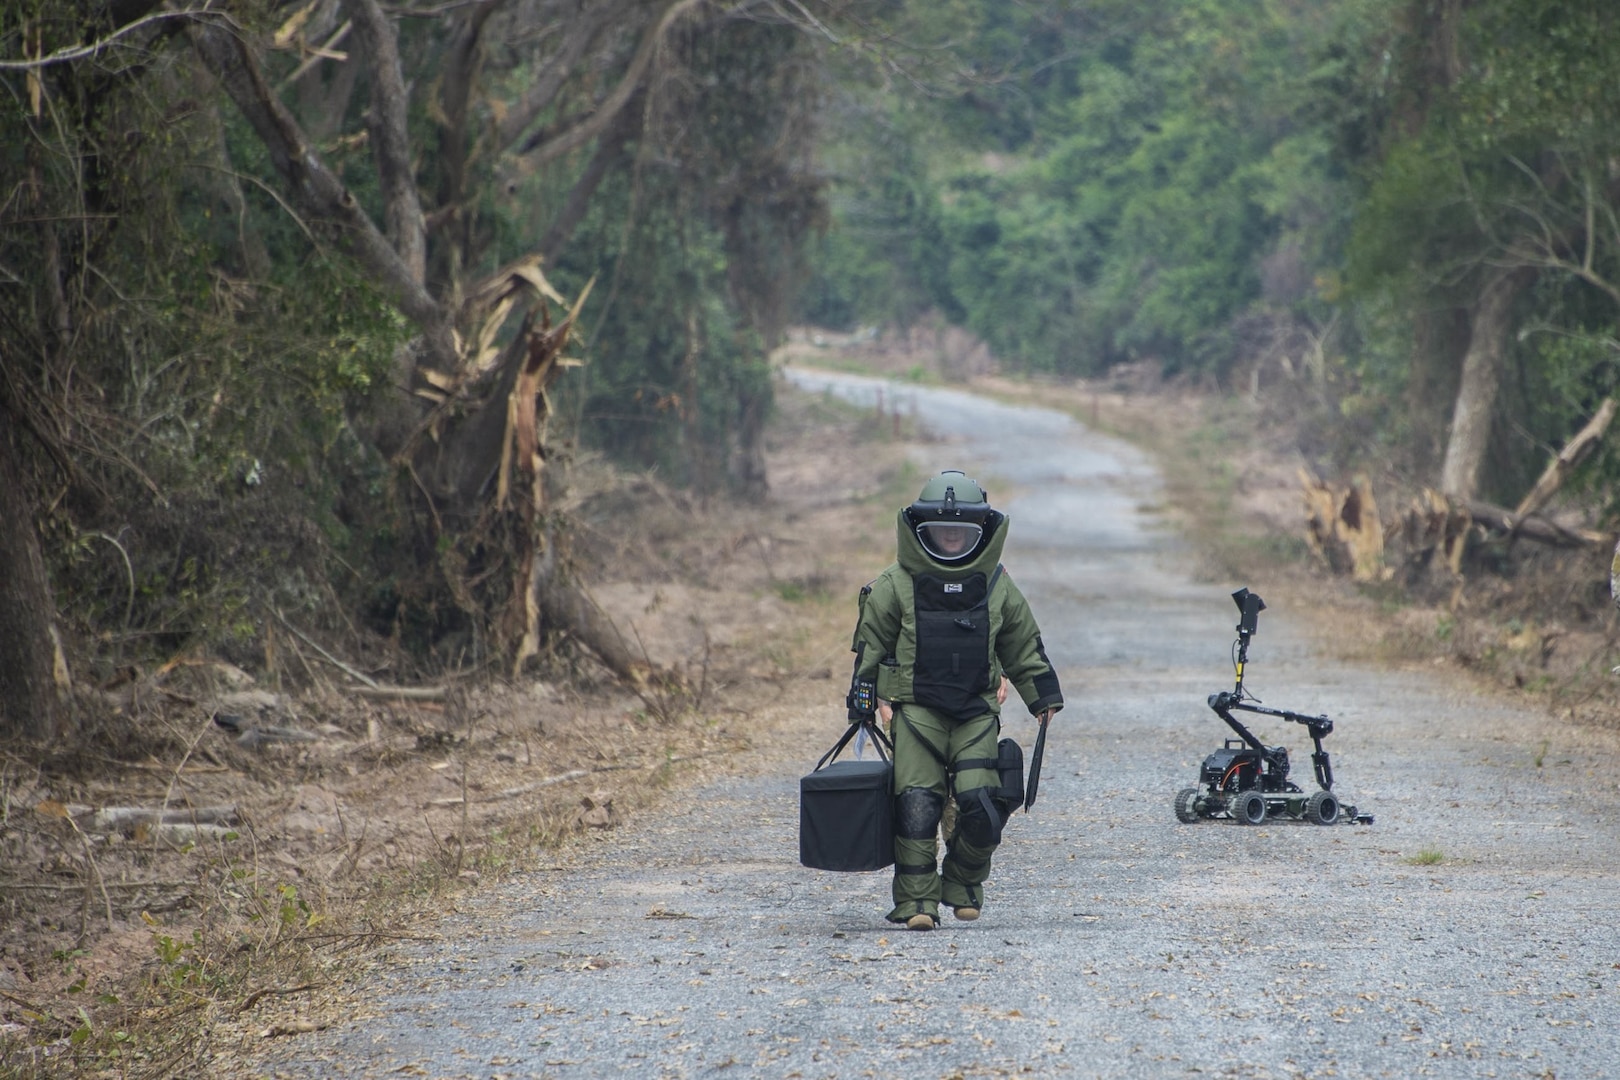 In this file photos, explosive Ordnance Disposal Technicians, deployed to Explosive Ordnance Disposal Mobile Unit (EODMU) 5 from EODMU 3, conduct counter improvised explosive device (IED) training with Royal Thai Military EOD units, as well as UDT/SEALs from the Republic of Korea during Cobra Gold 2016. Cobra Gold 2016, the 35th version of the military exercise, will bring together more than two dozen nations to address regional and global security challenges and to promote international cooperation and stability within the region. 